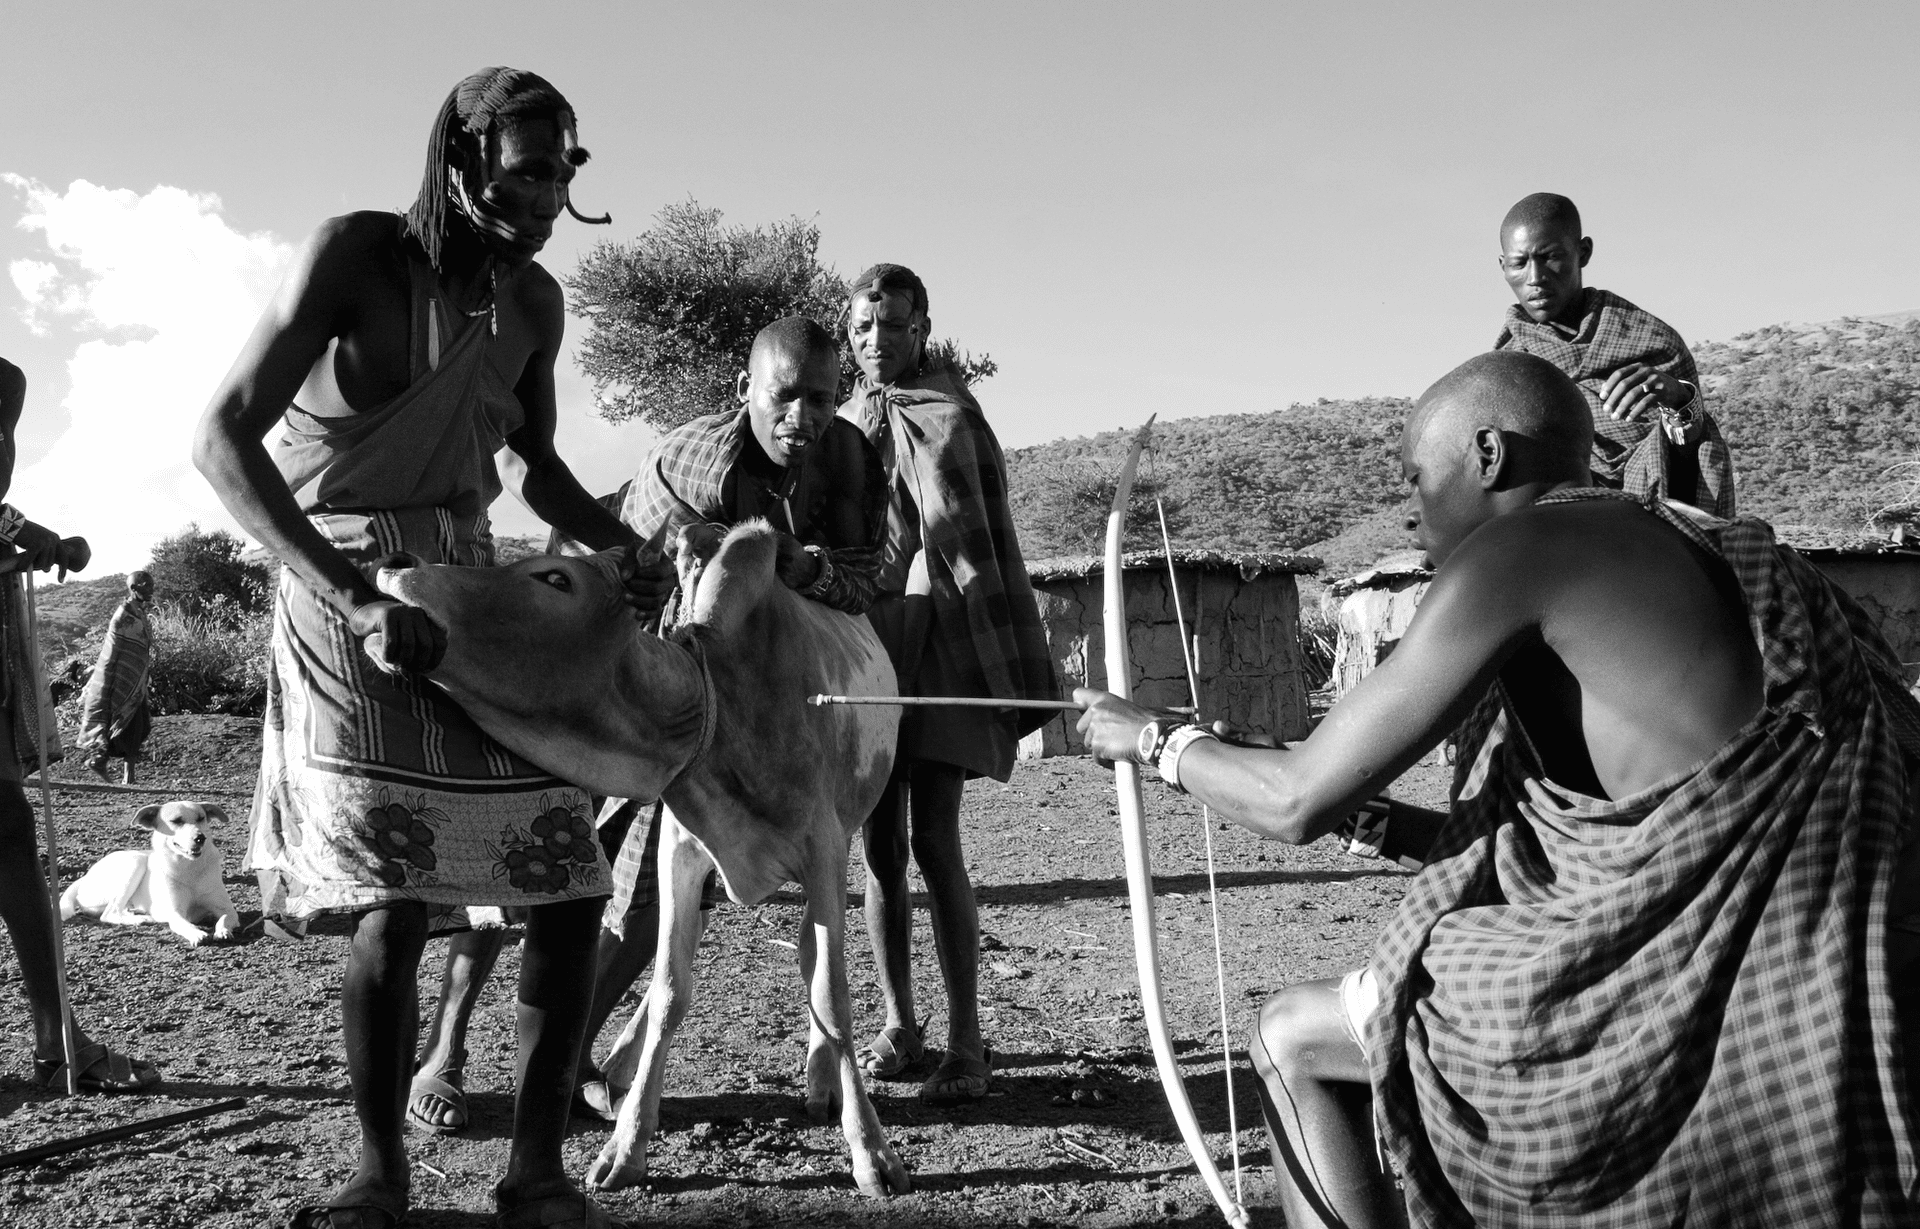 Maasai diet - poking a cow to get blood for drinking